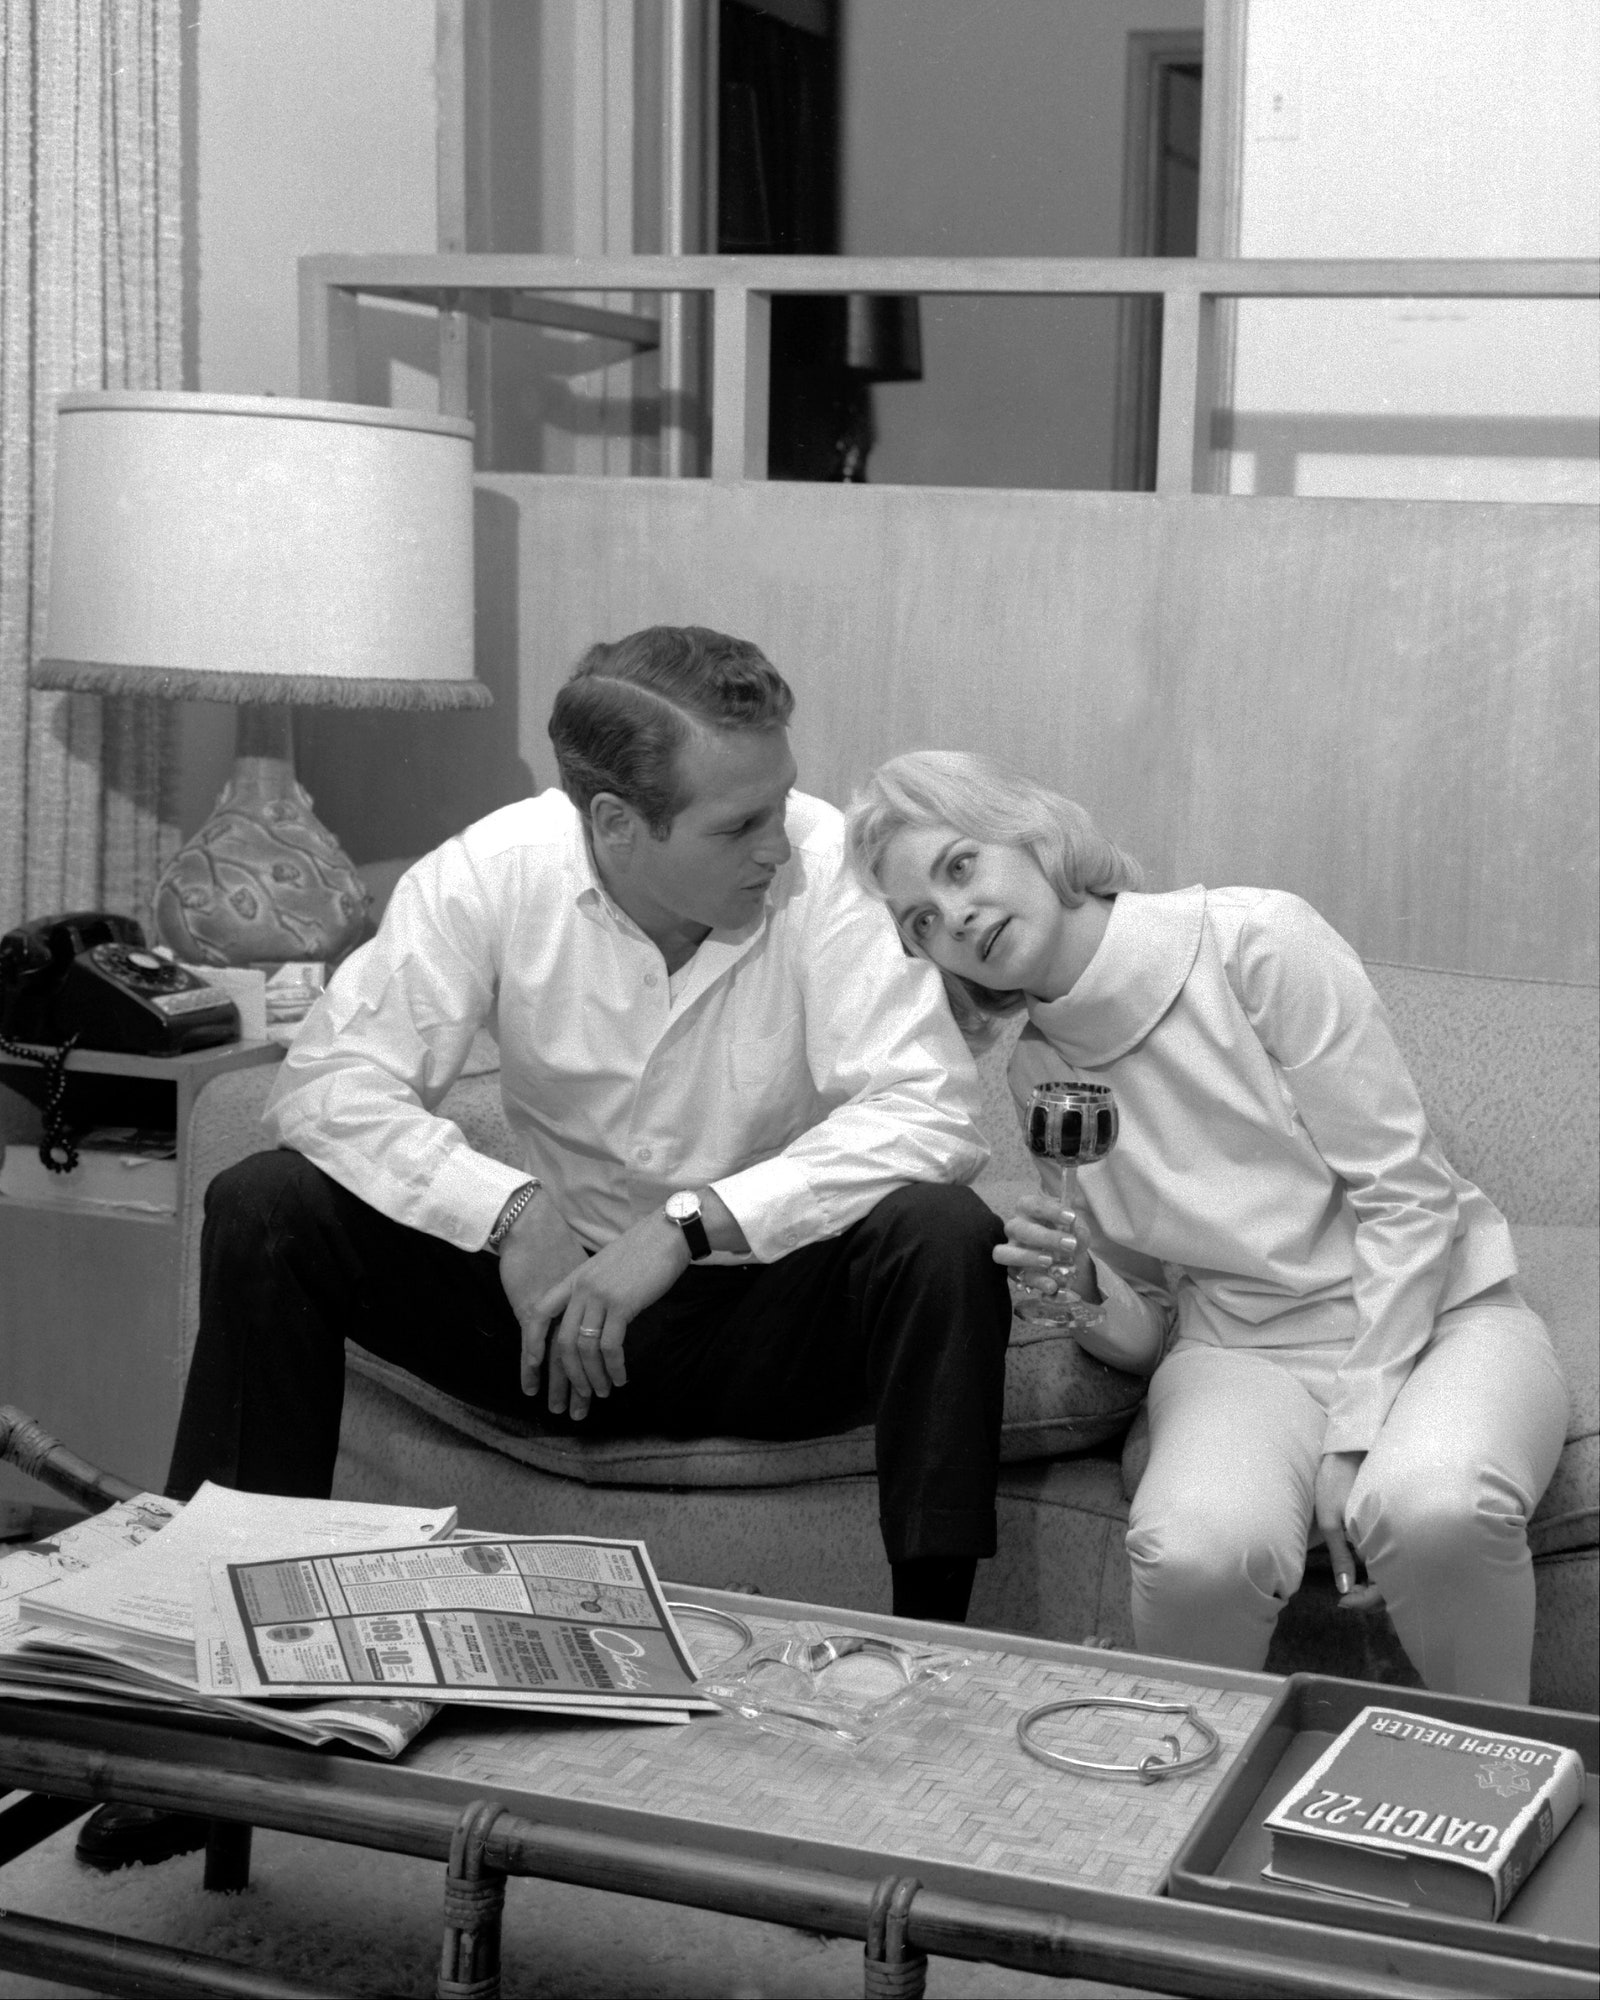 Paul Newman left and Joanne Woodward sitting on a sofa coffee table in front of them with newspapers a copy of Catch22